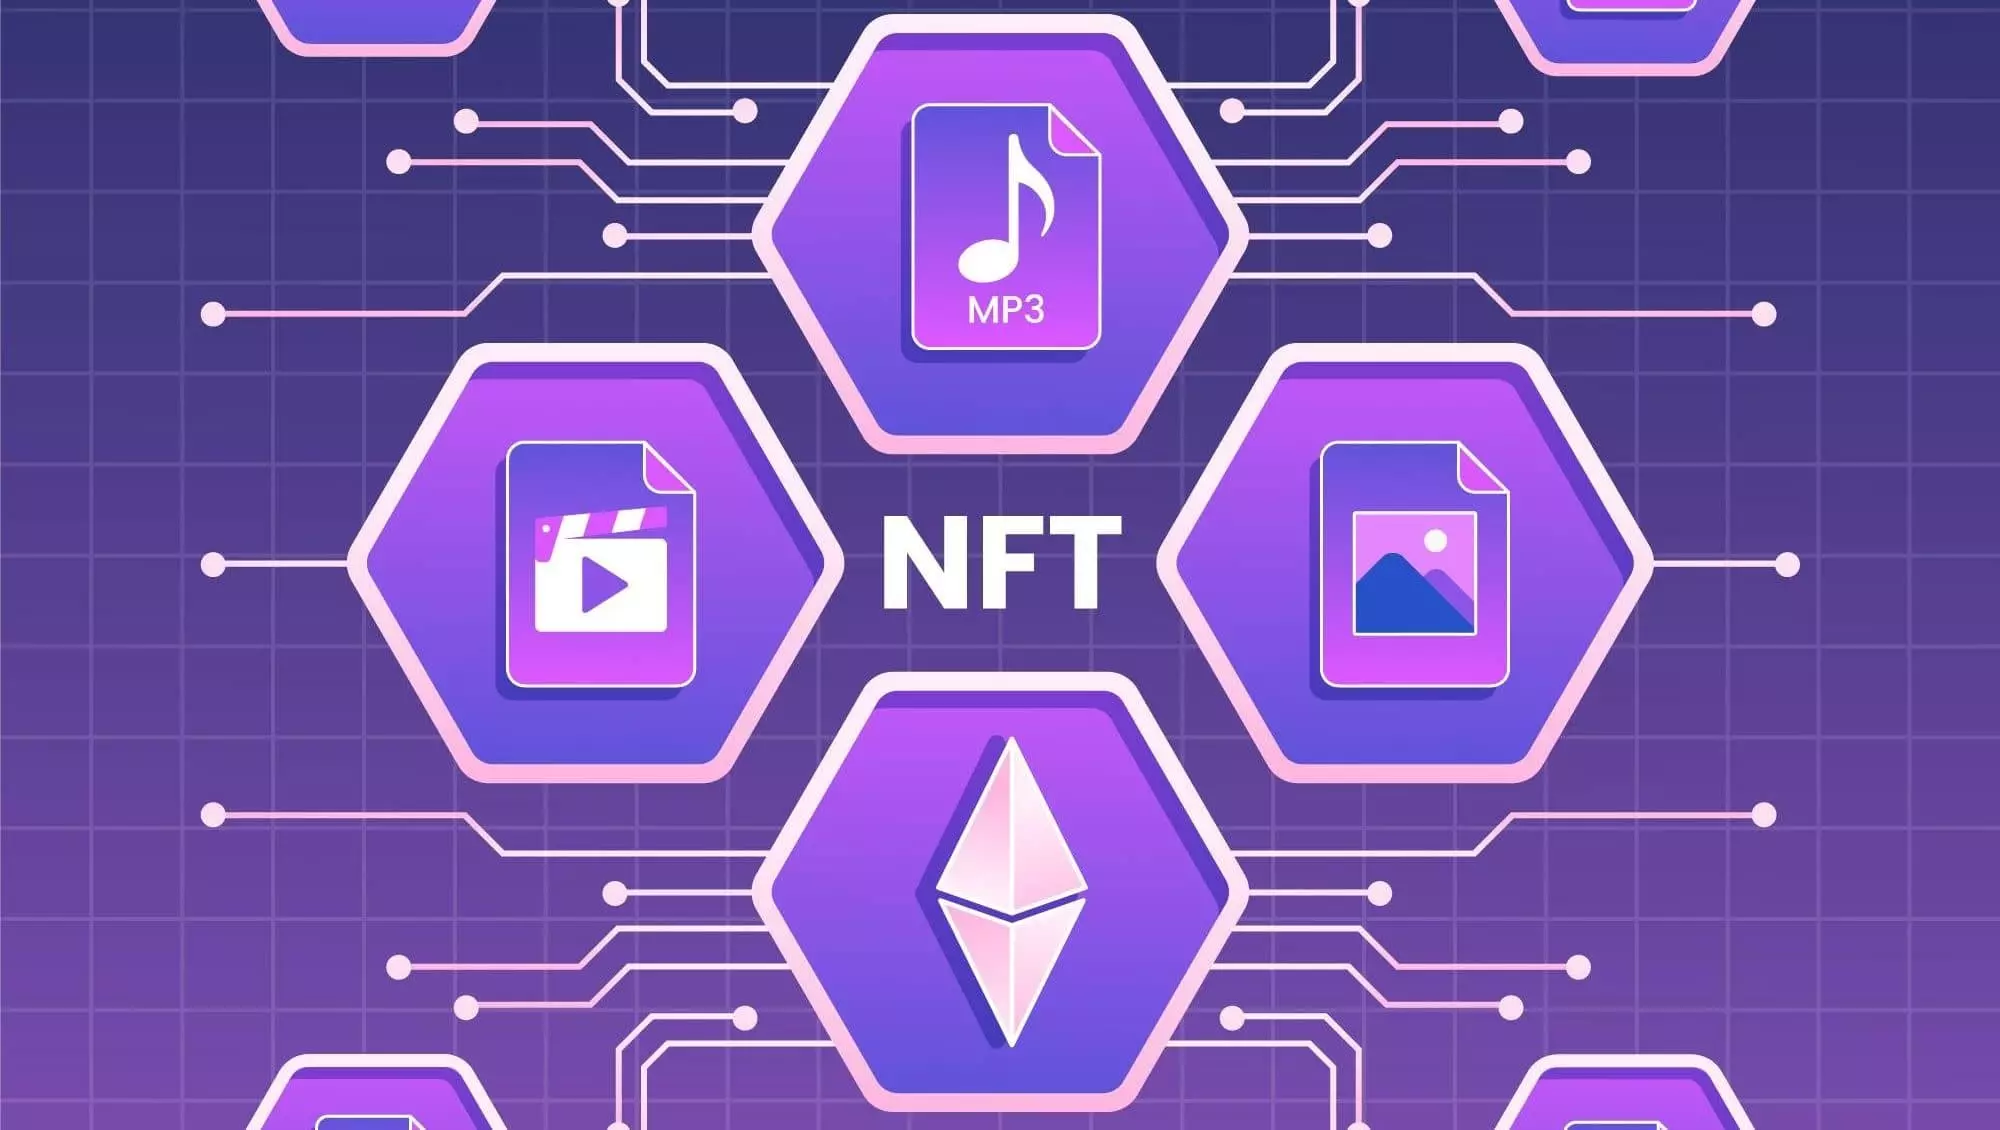 Image featuring various types of NFTs